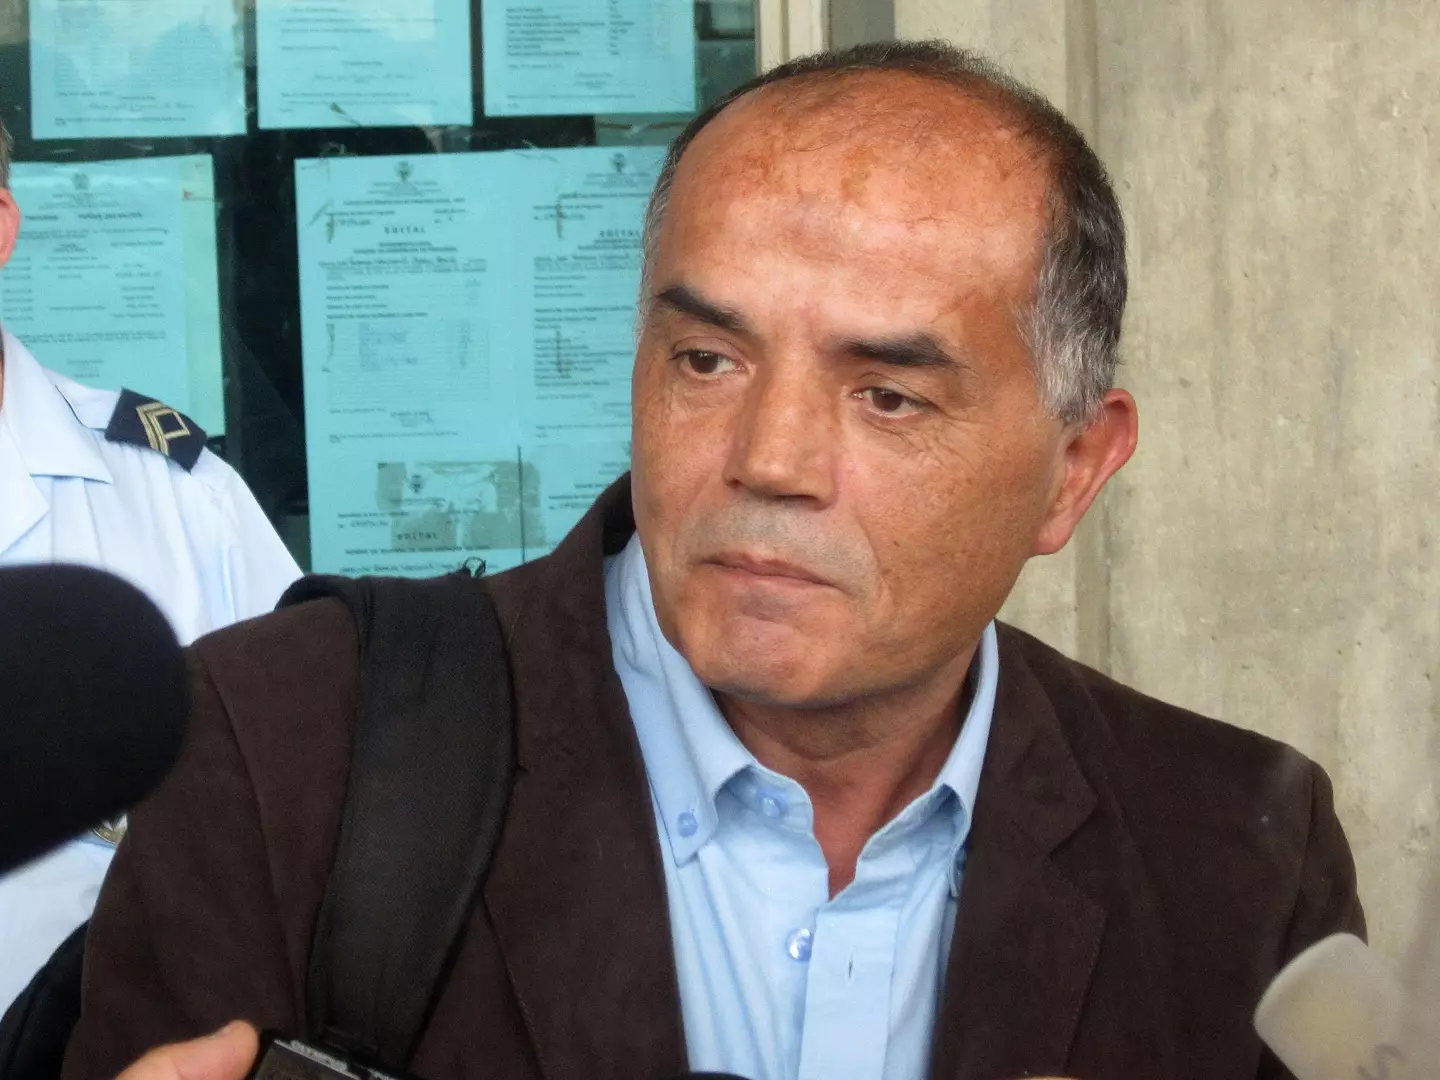 Former PJ police coordinator Goncalo Amaral took part in a newspaper interview, television documentary and released a book about the McCann's.